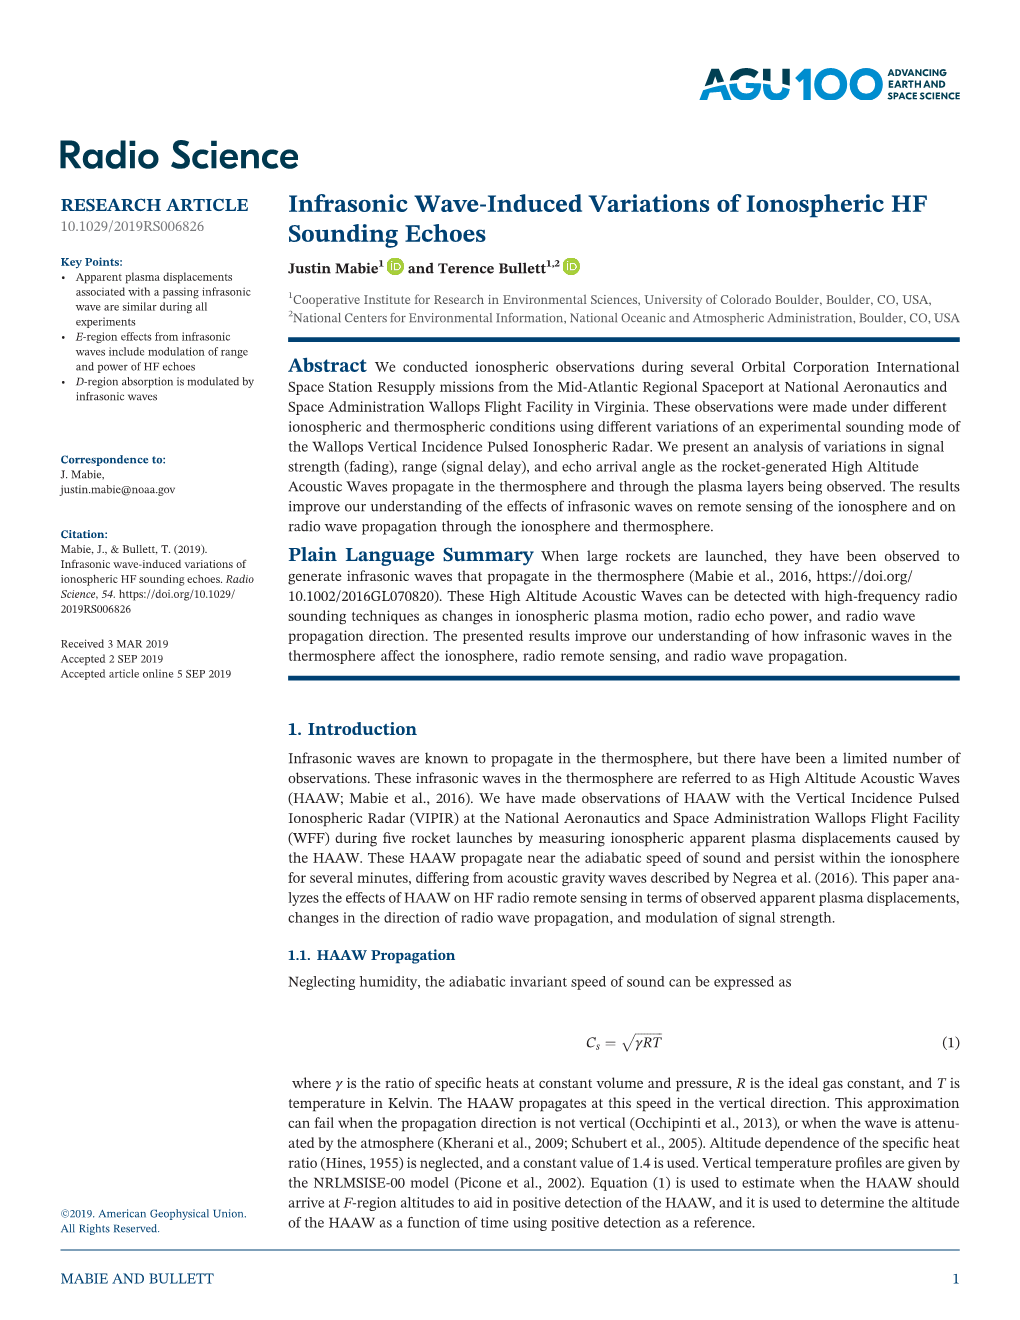 Infrasonic Wave‐Induced Variations of Ionospheric HF Sounding Echoes